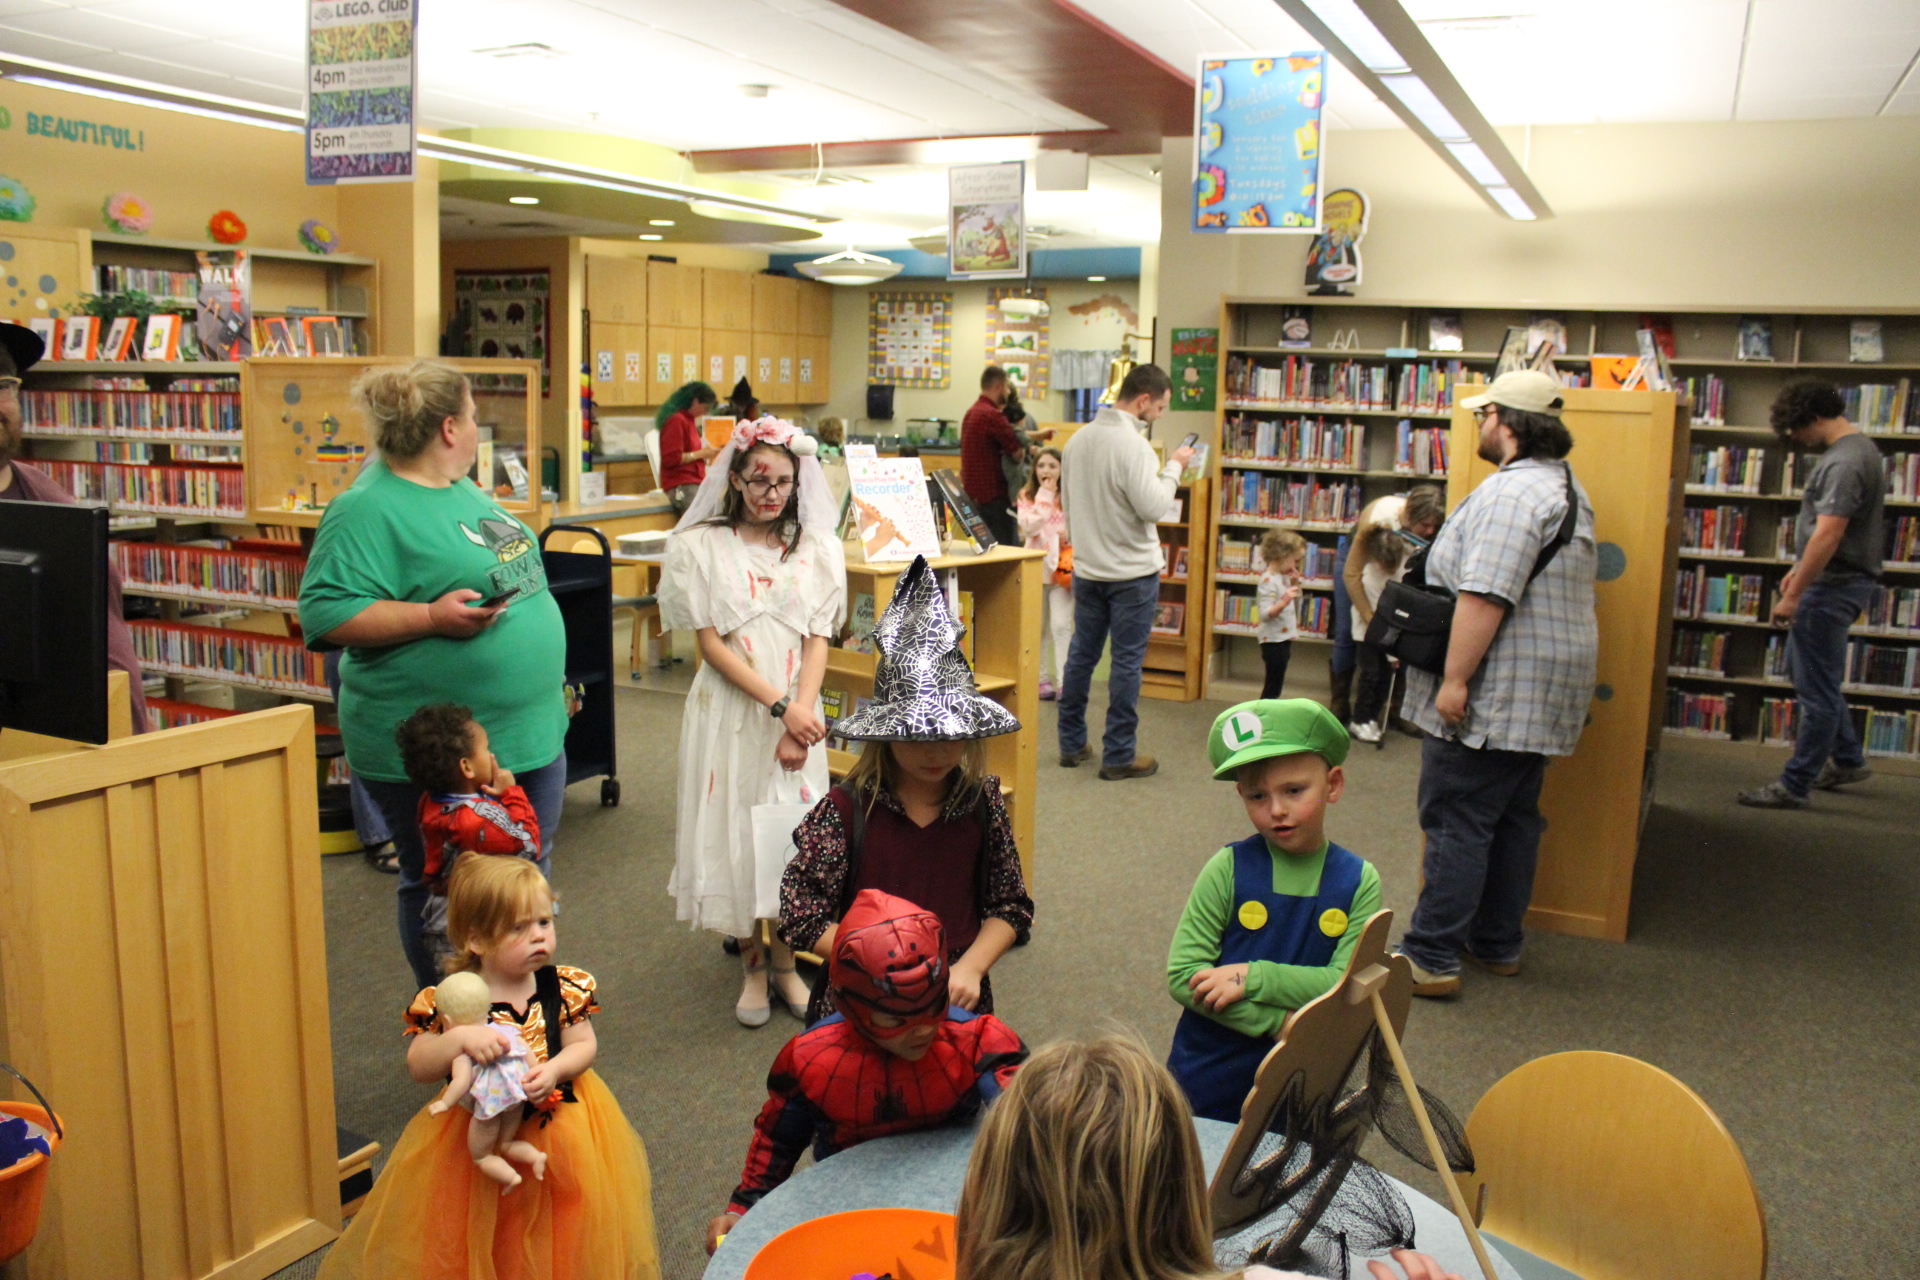 Costumed children playing games in library children's area